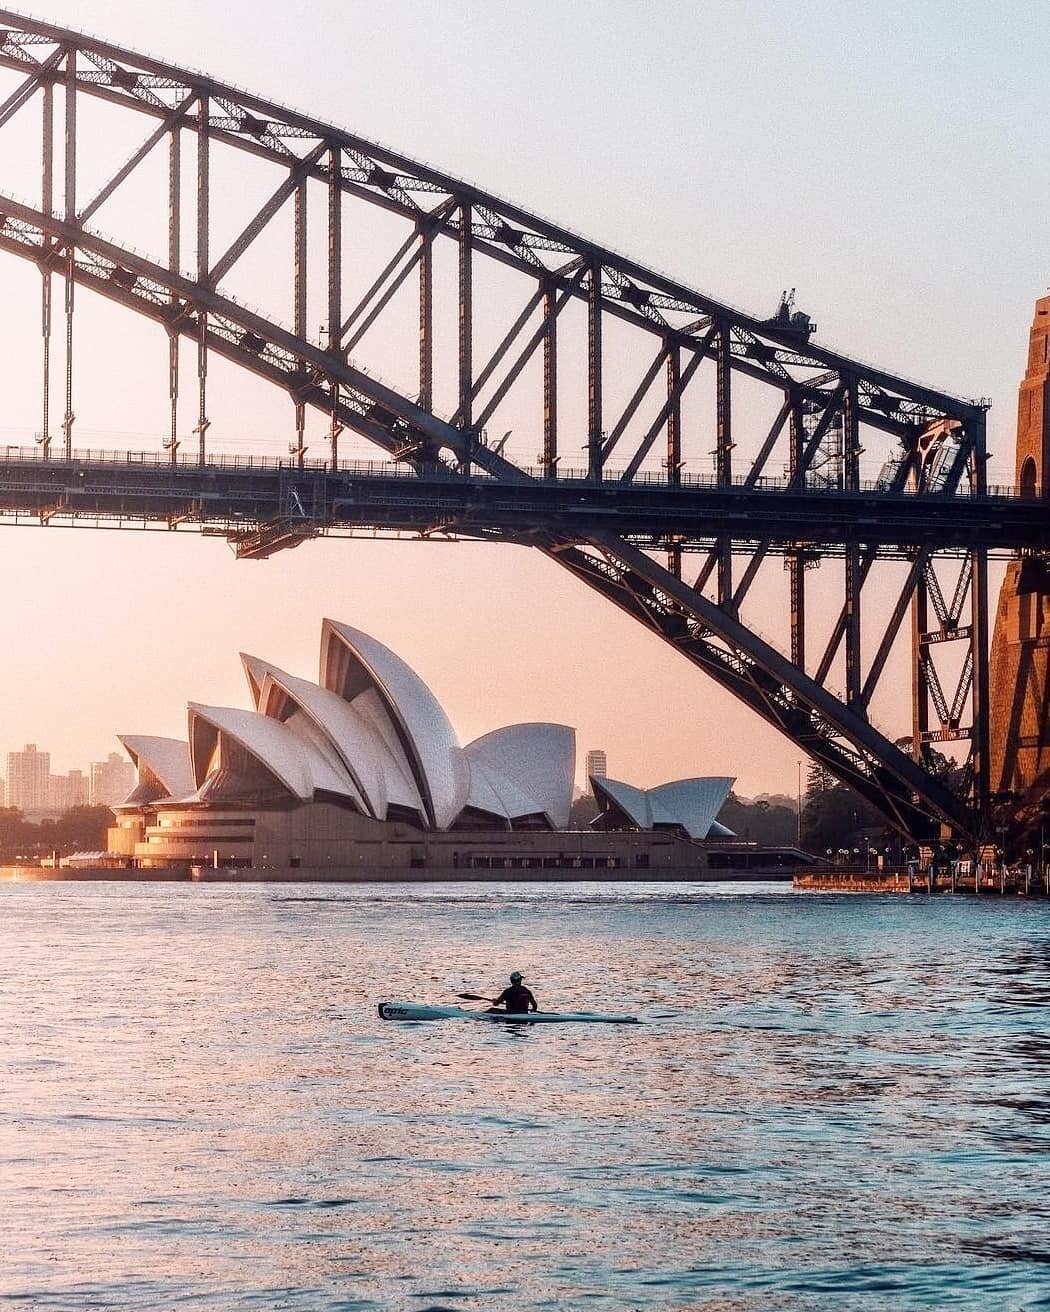 Singapore! Welcome back to Australia. Quarantine free travel to the land downunder has now resumed for fully vaccinated travellers.
📸: @ianharper
.
.
Begin your escape with us:
📧 info@exclusivetravelgroup.com
🌐 www.exclusivetravelgroup.com